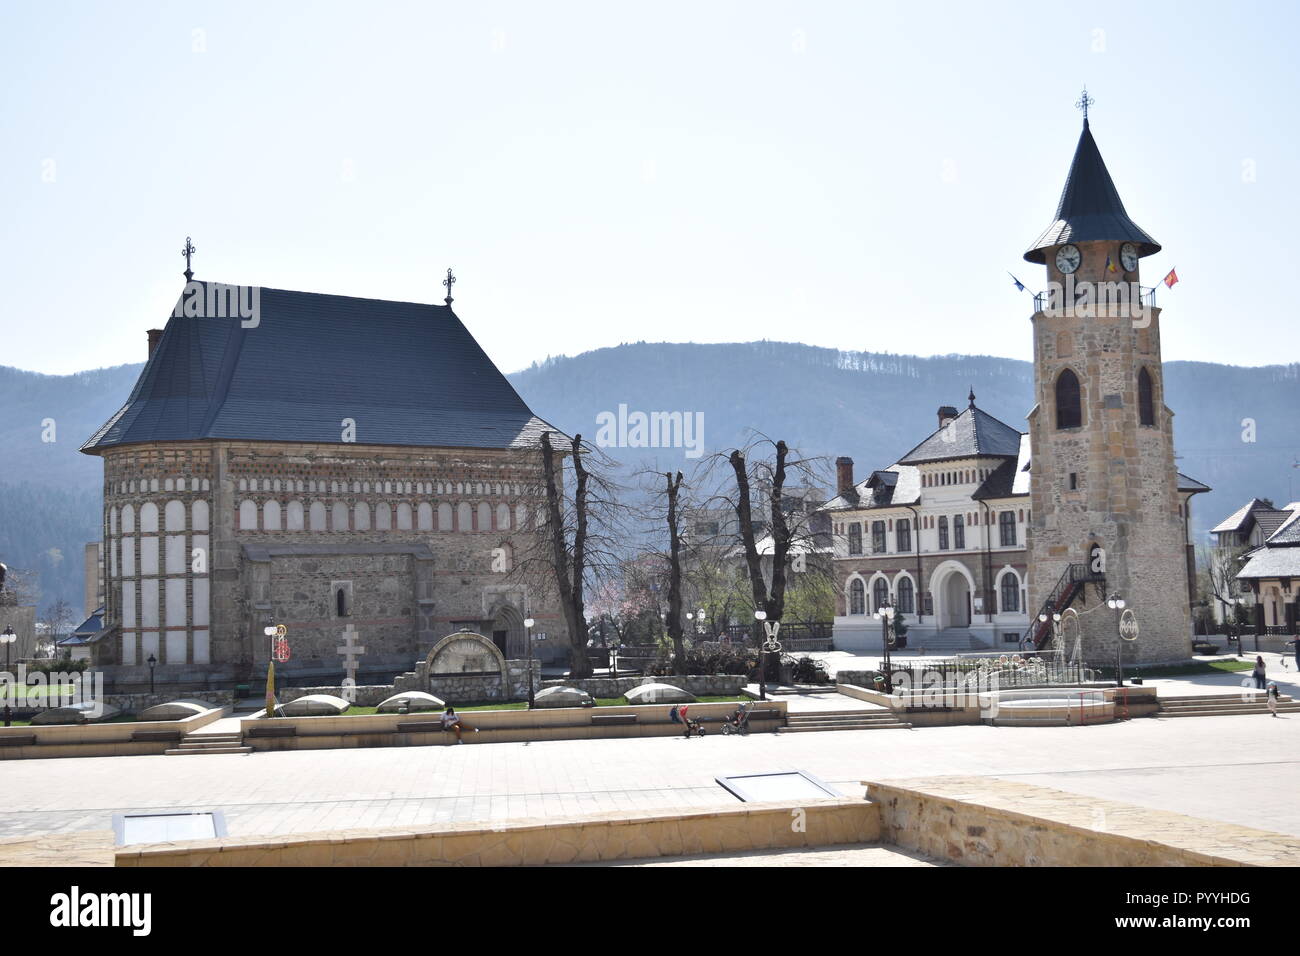 Church and tower built by Stephen the Great of Moldova, Piatra Neamt, Romania Stock Photo